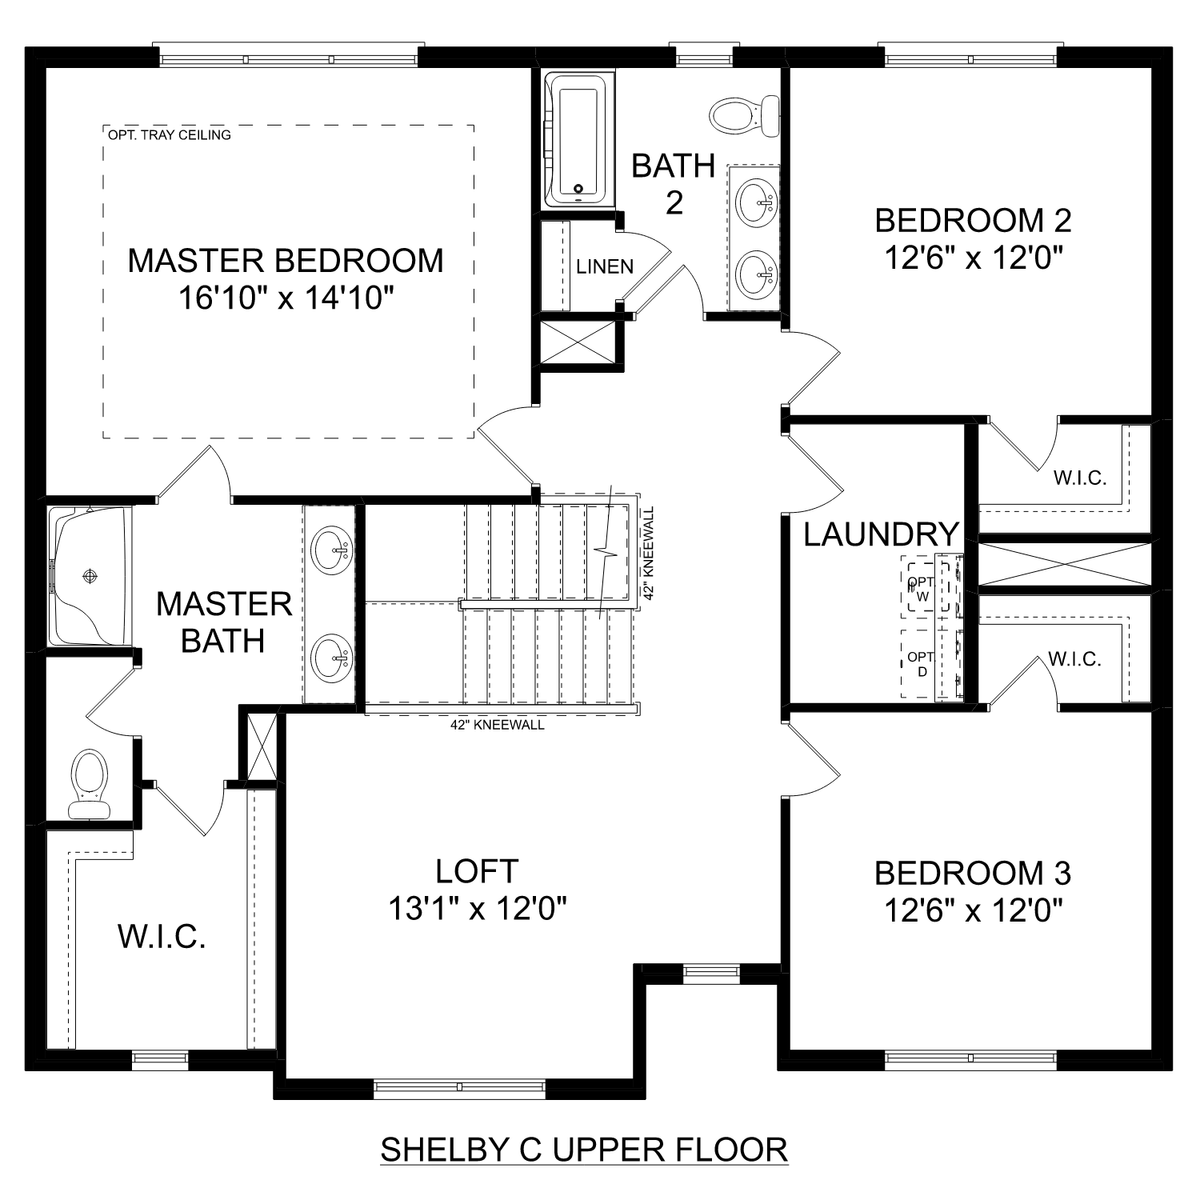 2 - The Shelby C floor plan layout for 24601 Beacon Circle in Davidson Homes' Old Stone community.